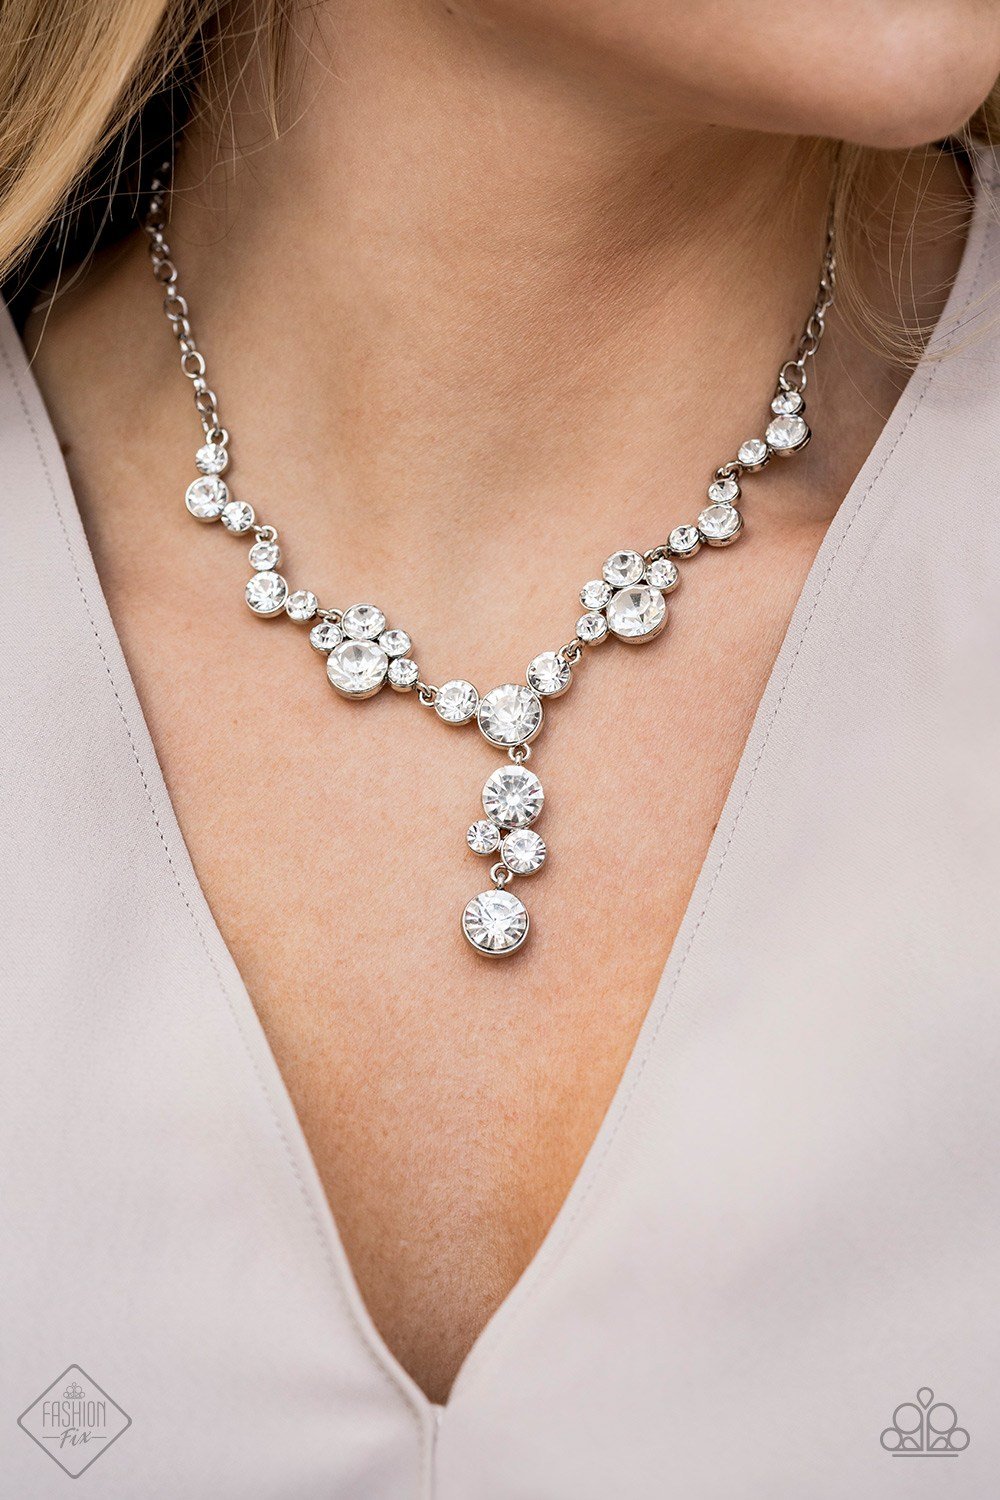 Paparazzi February 2020 - Fiercely 5th Avenue Necklace: 